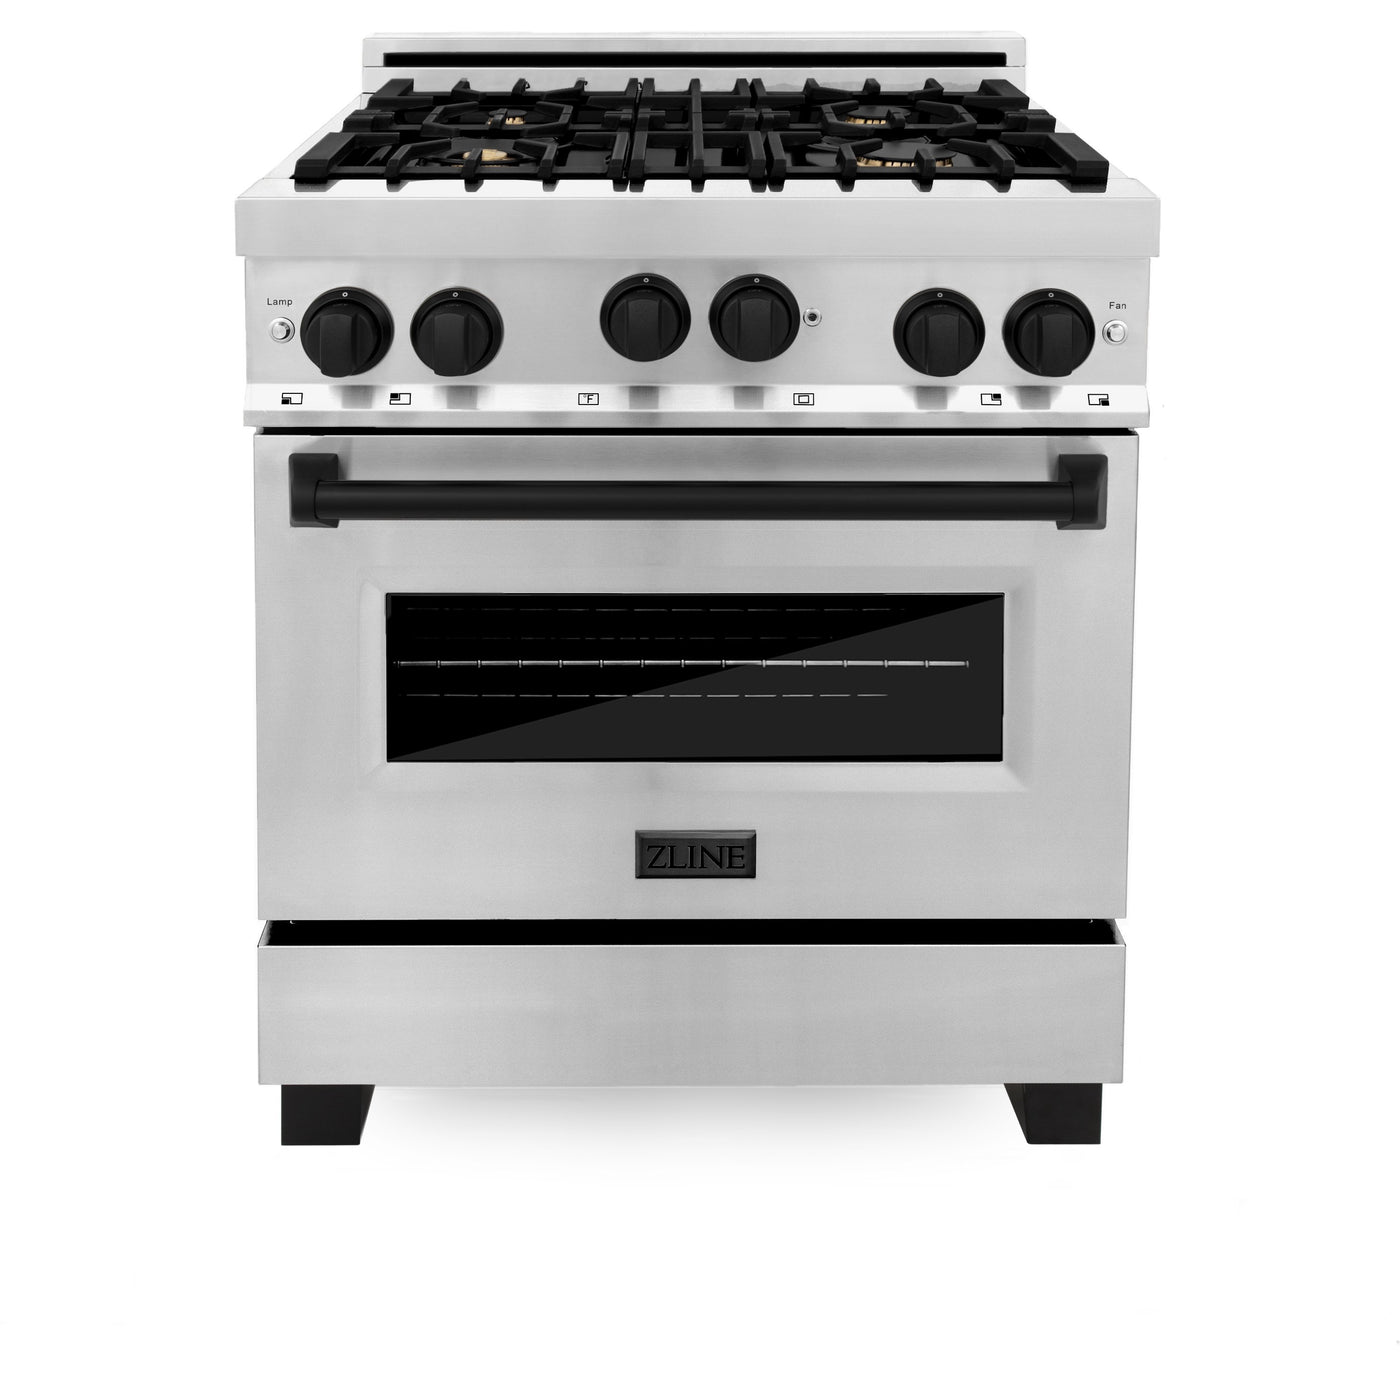 ZLINE Autograph Edition 30" 4.0 cu. ft. Range with Gas Stove and Gas Oven in Stainless Steel with Accents (RGZ-30)